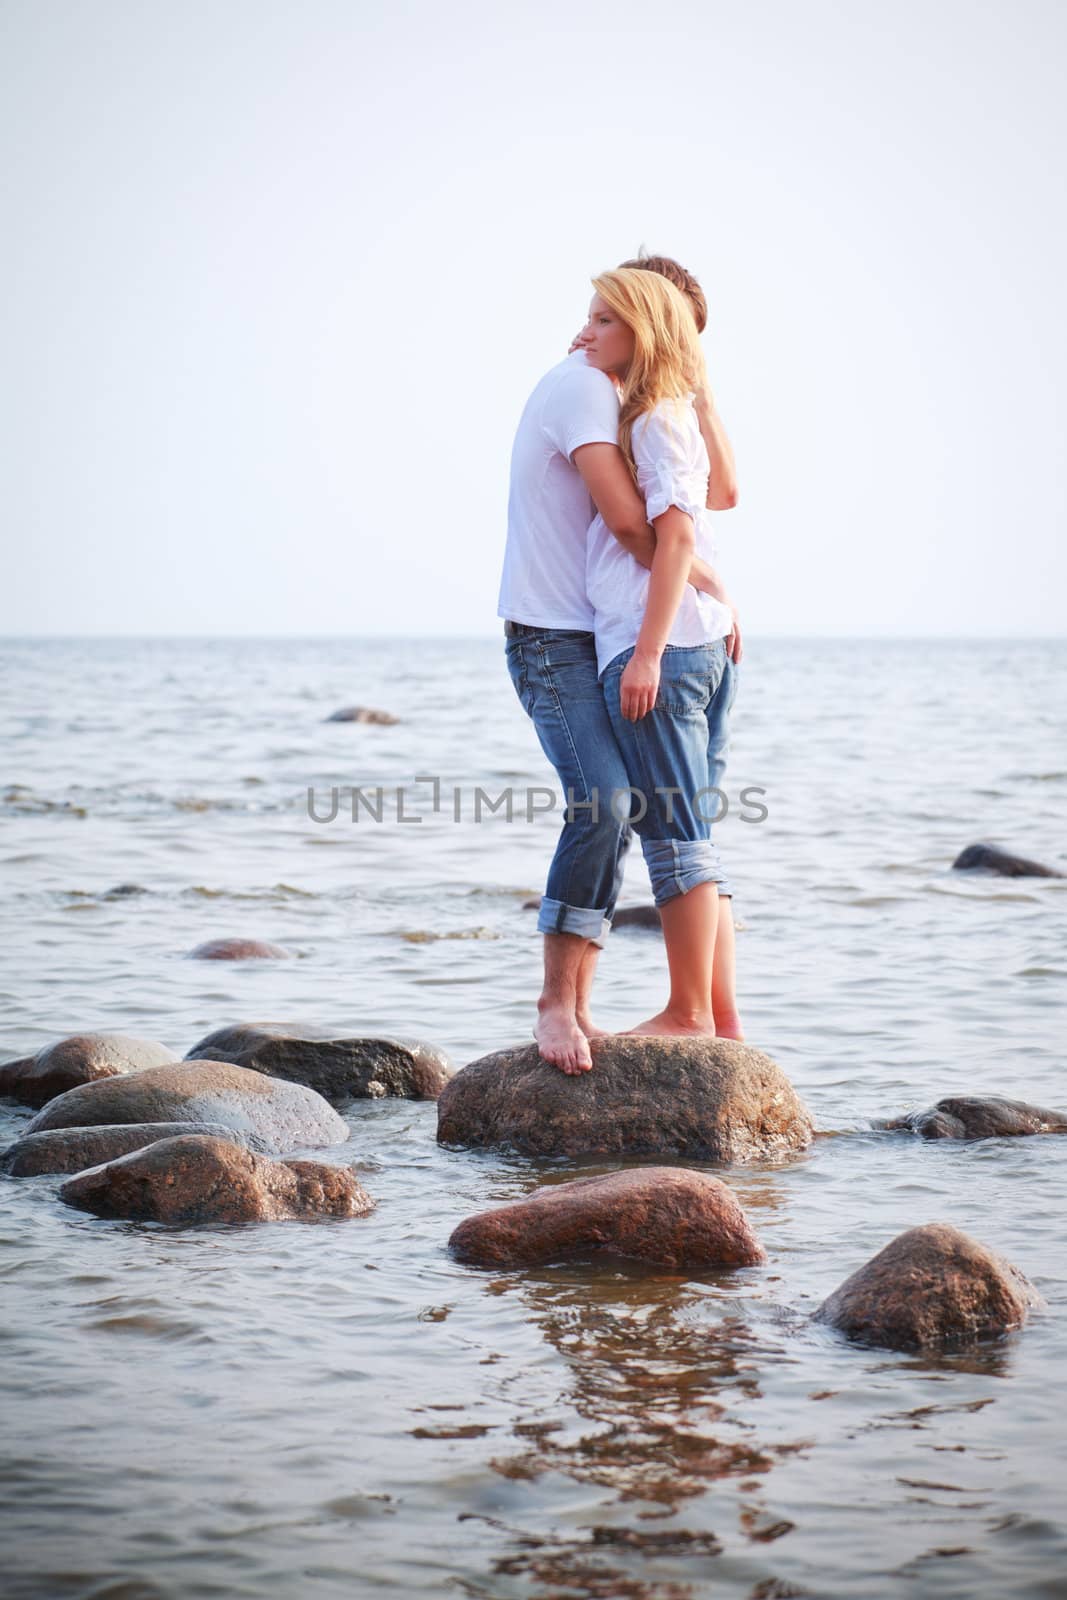 couple embrace on a stone in sea by petr_malyshev